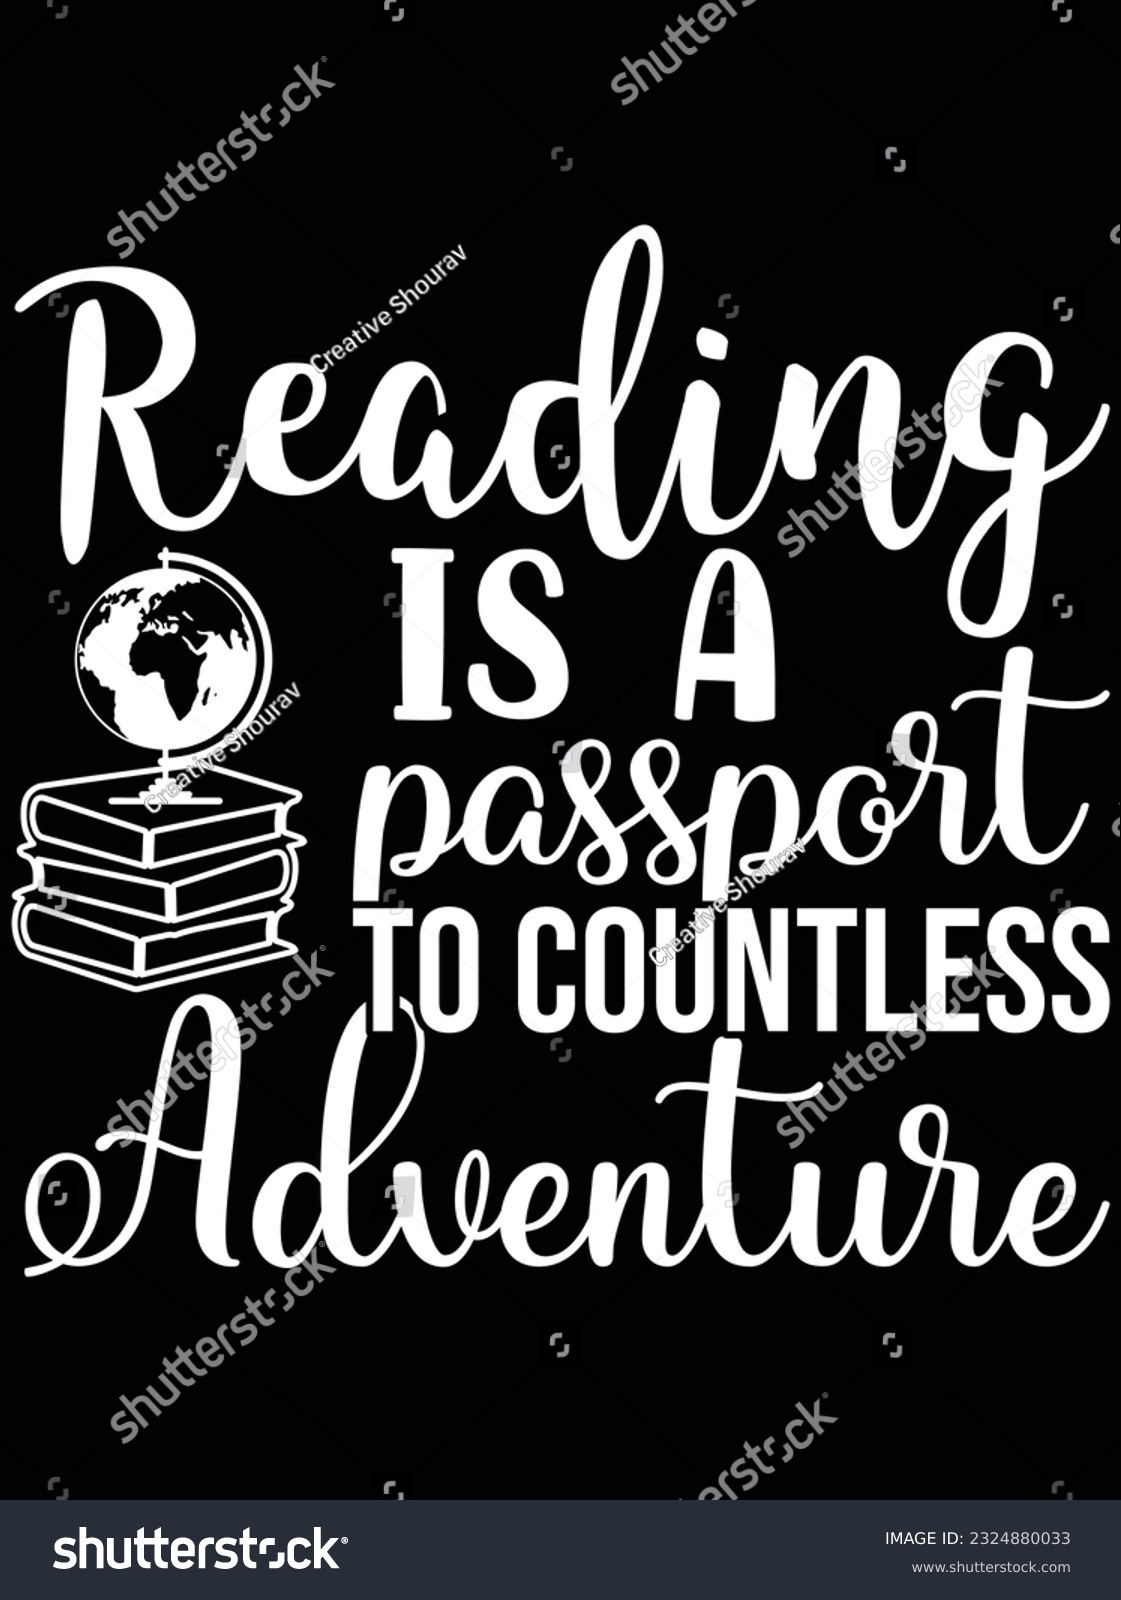 SVG of Reading is a passport to countless adventure vector art design, eps file. design file for t-shirt. SVG, EPS cuttable design file svg